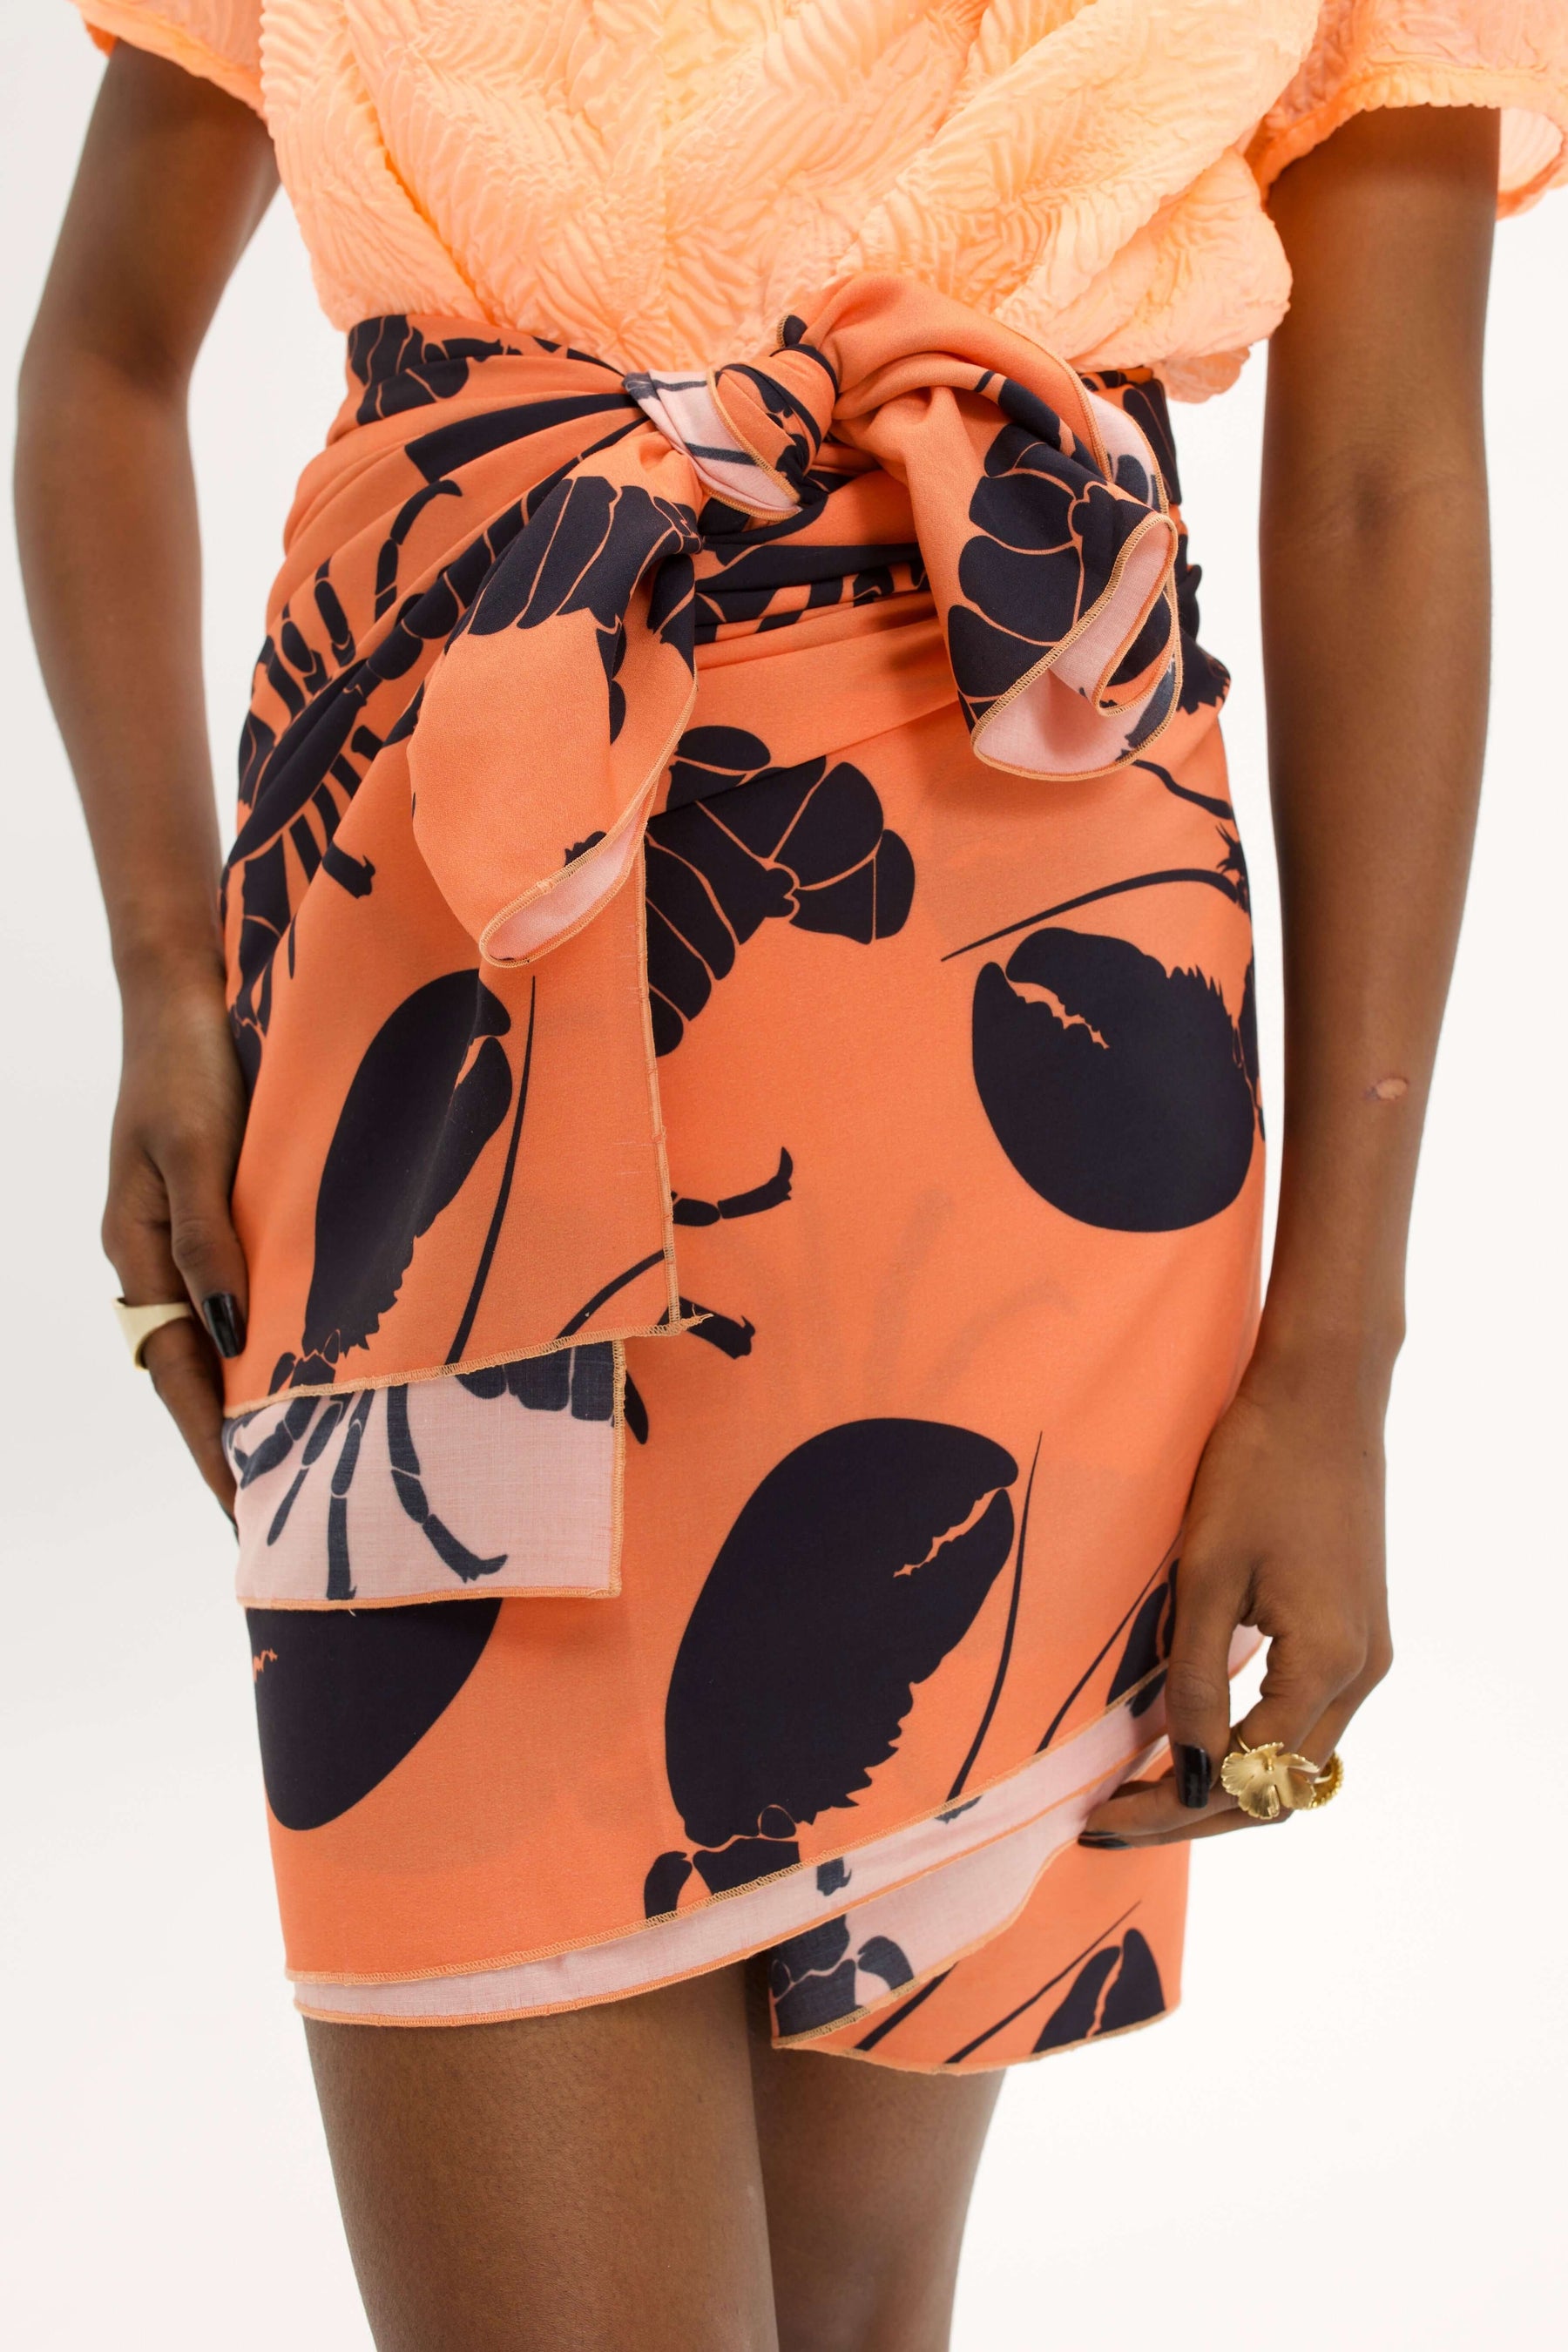 The Pareo-skirt, in 732 grams print